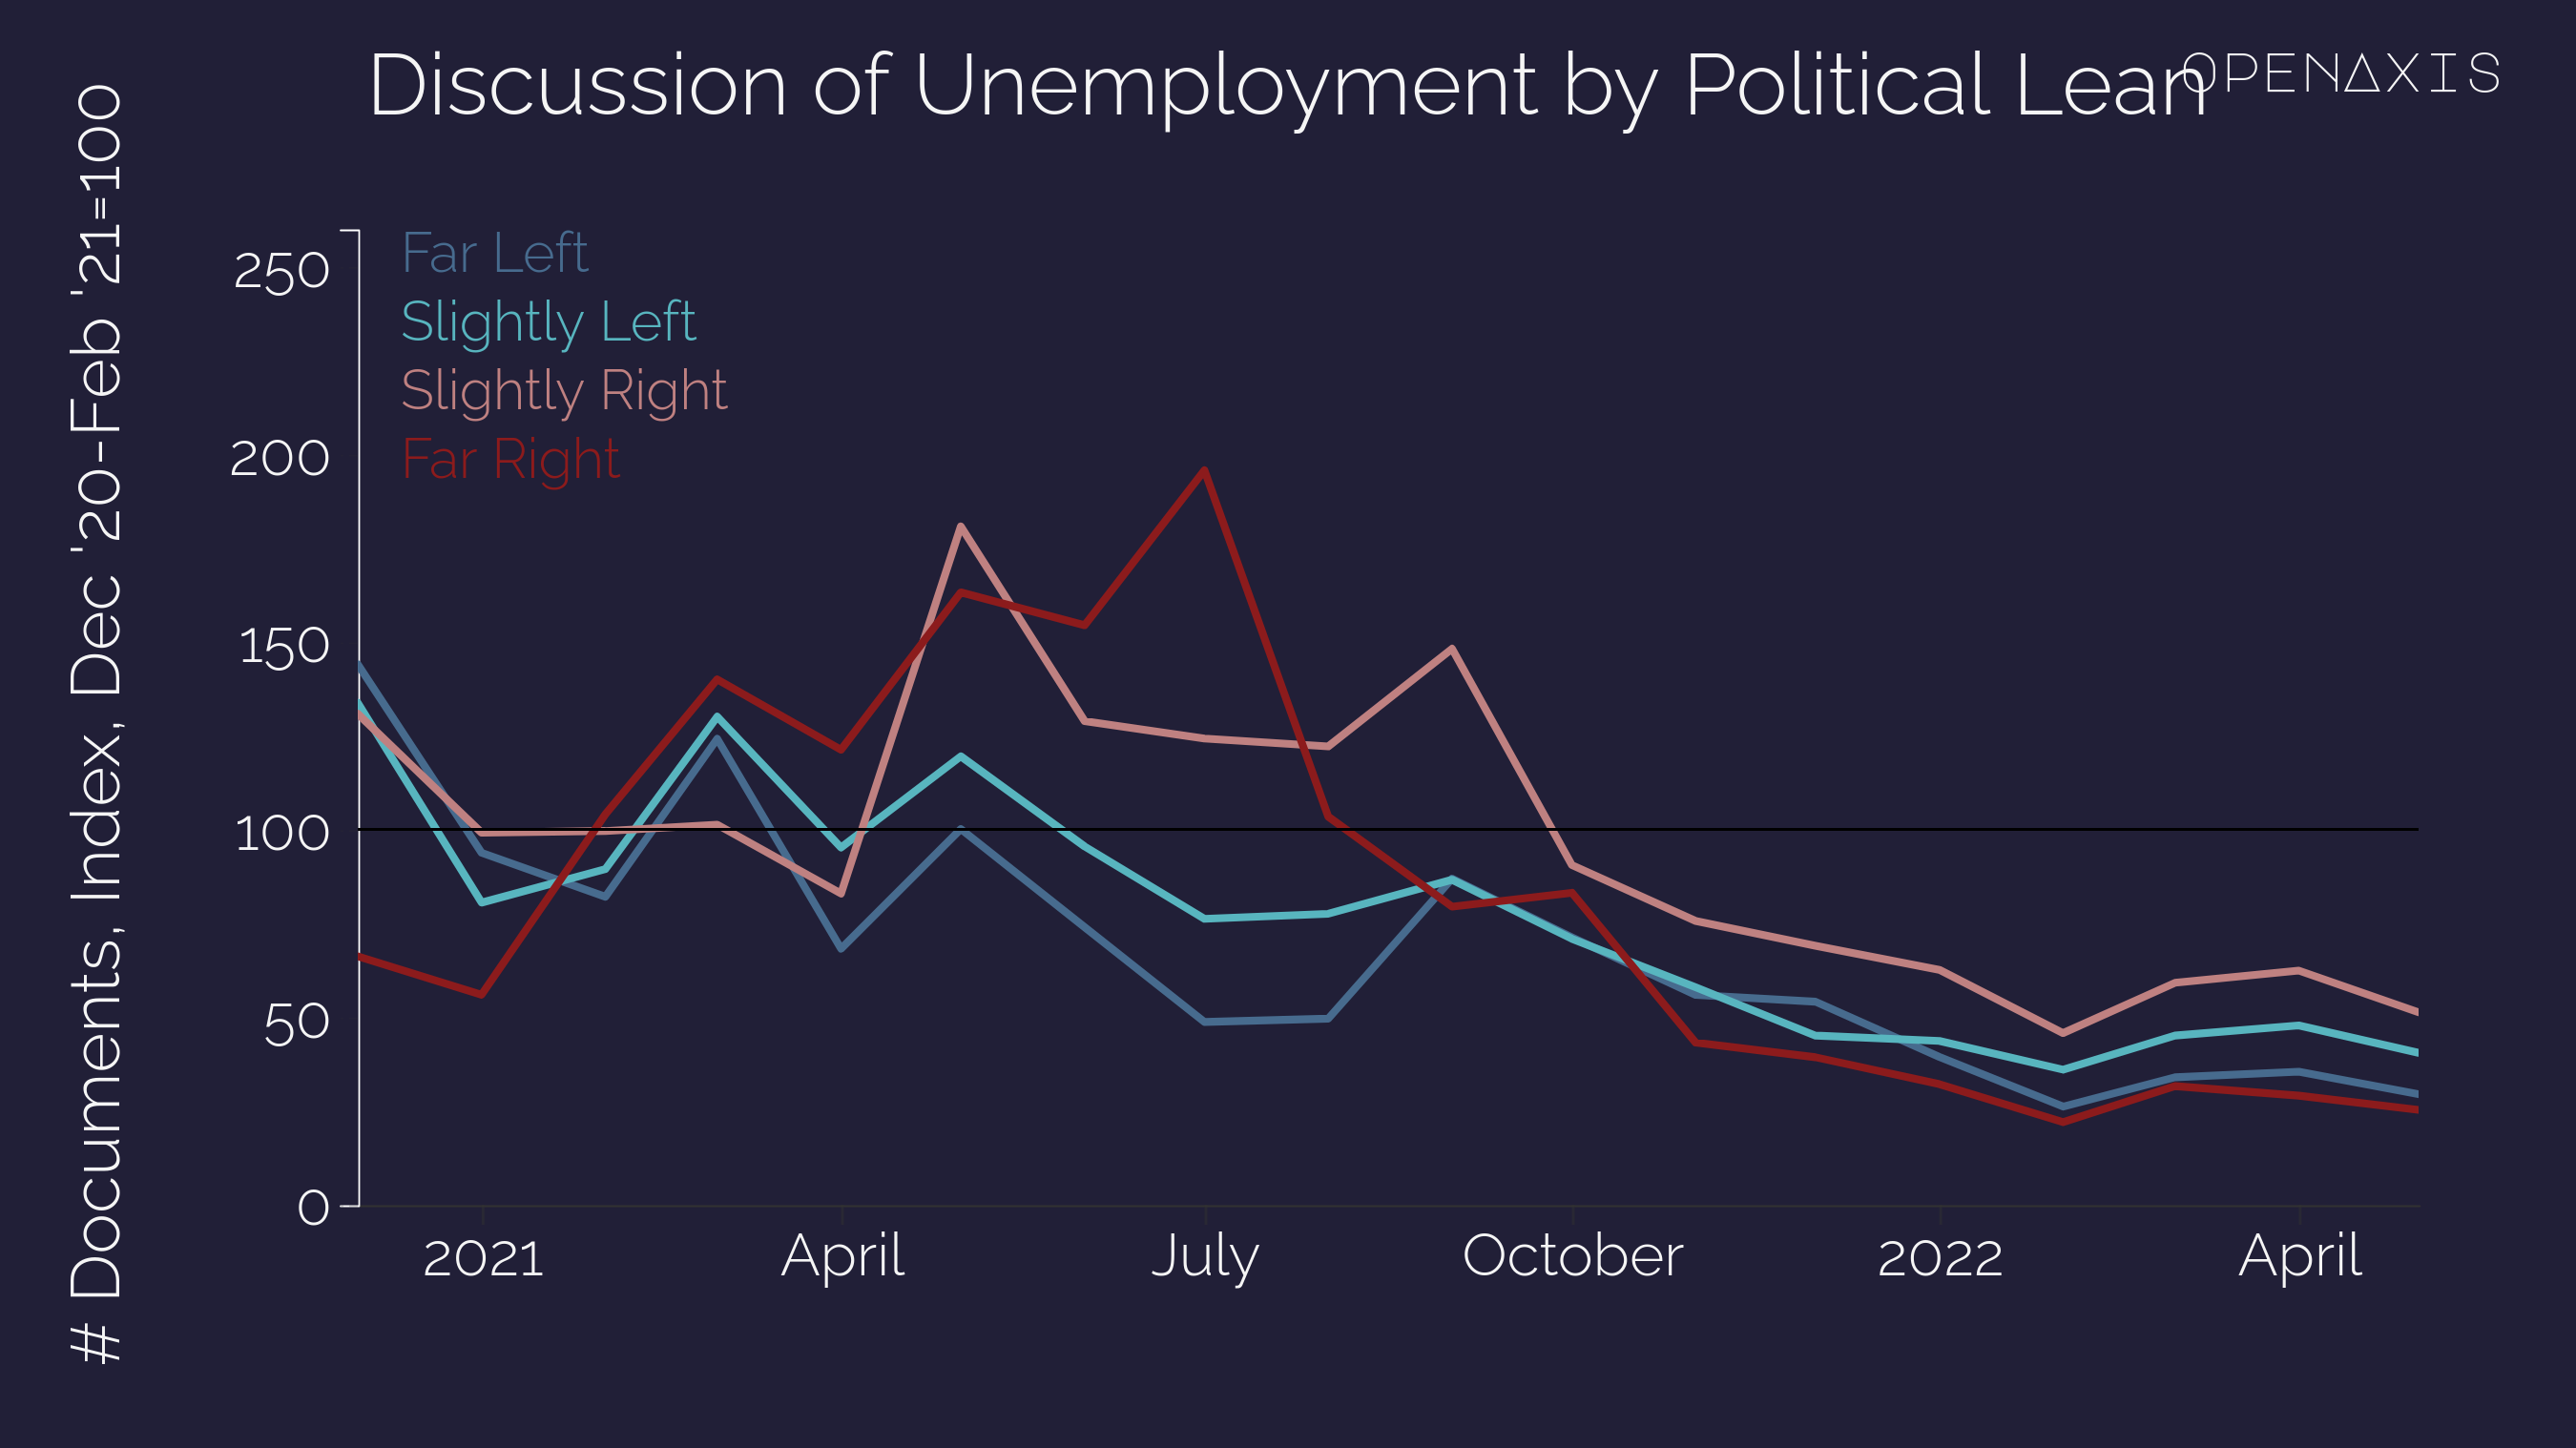 "Discussion of Unemployment by Political Lean"